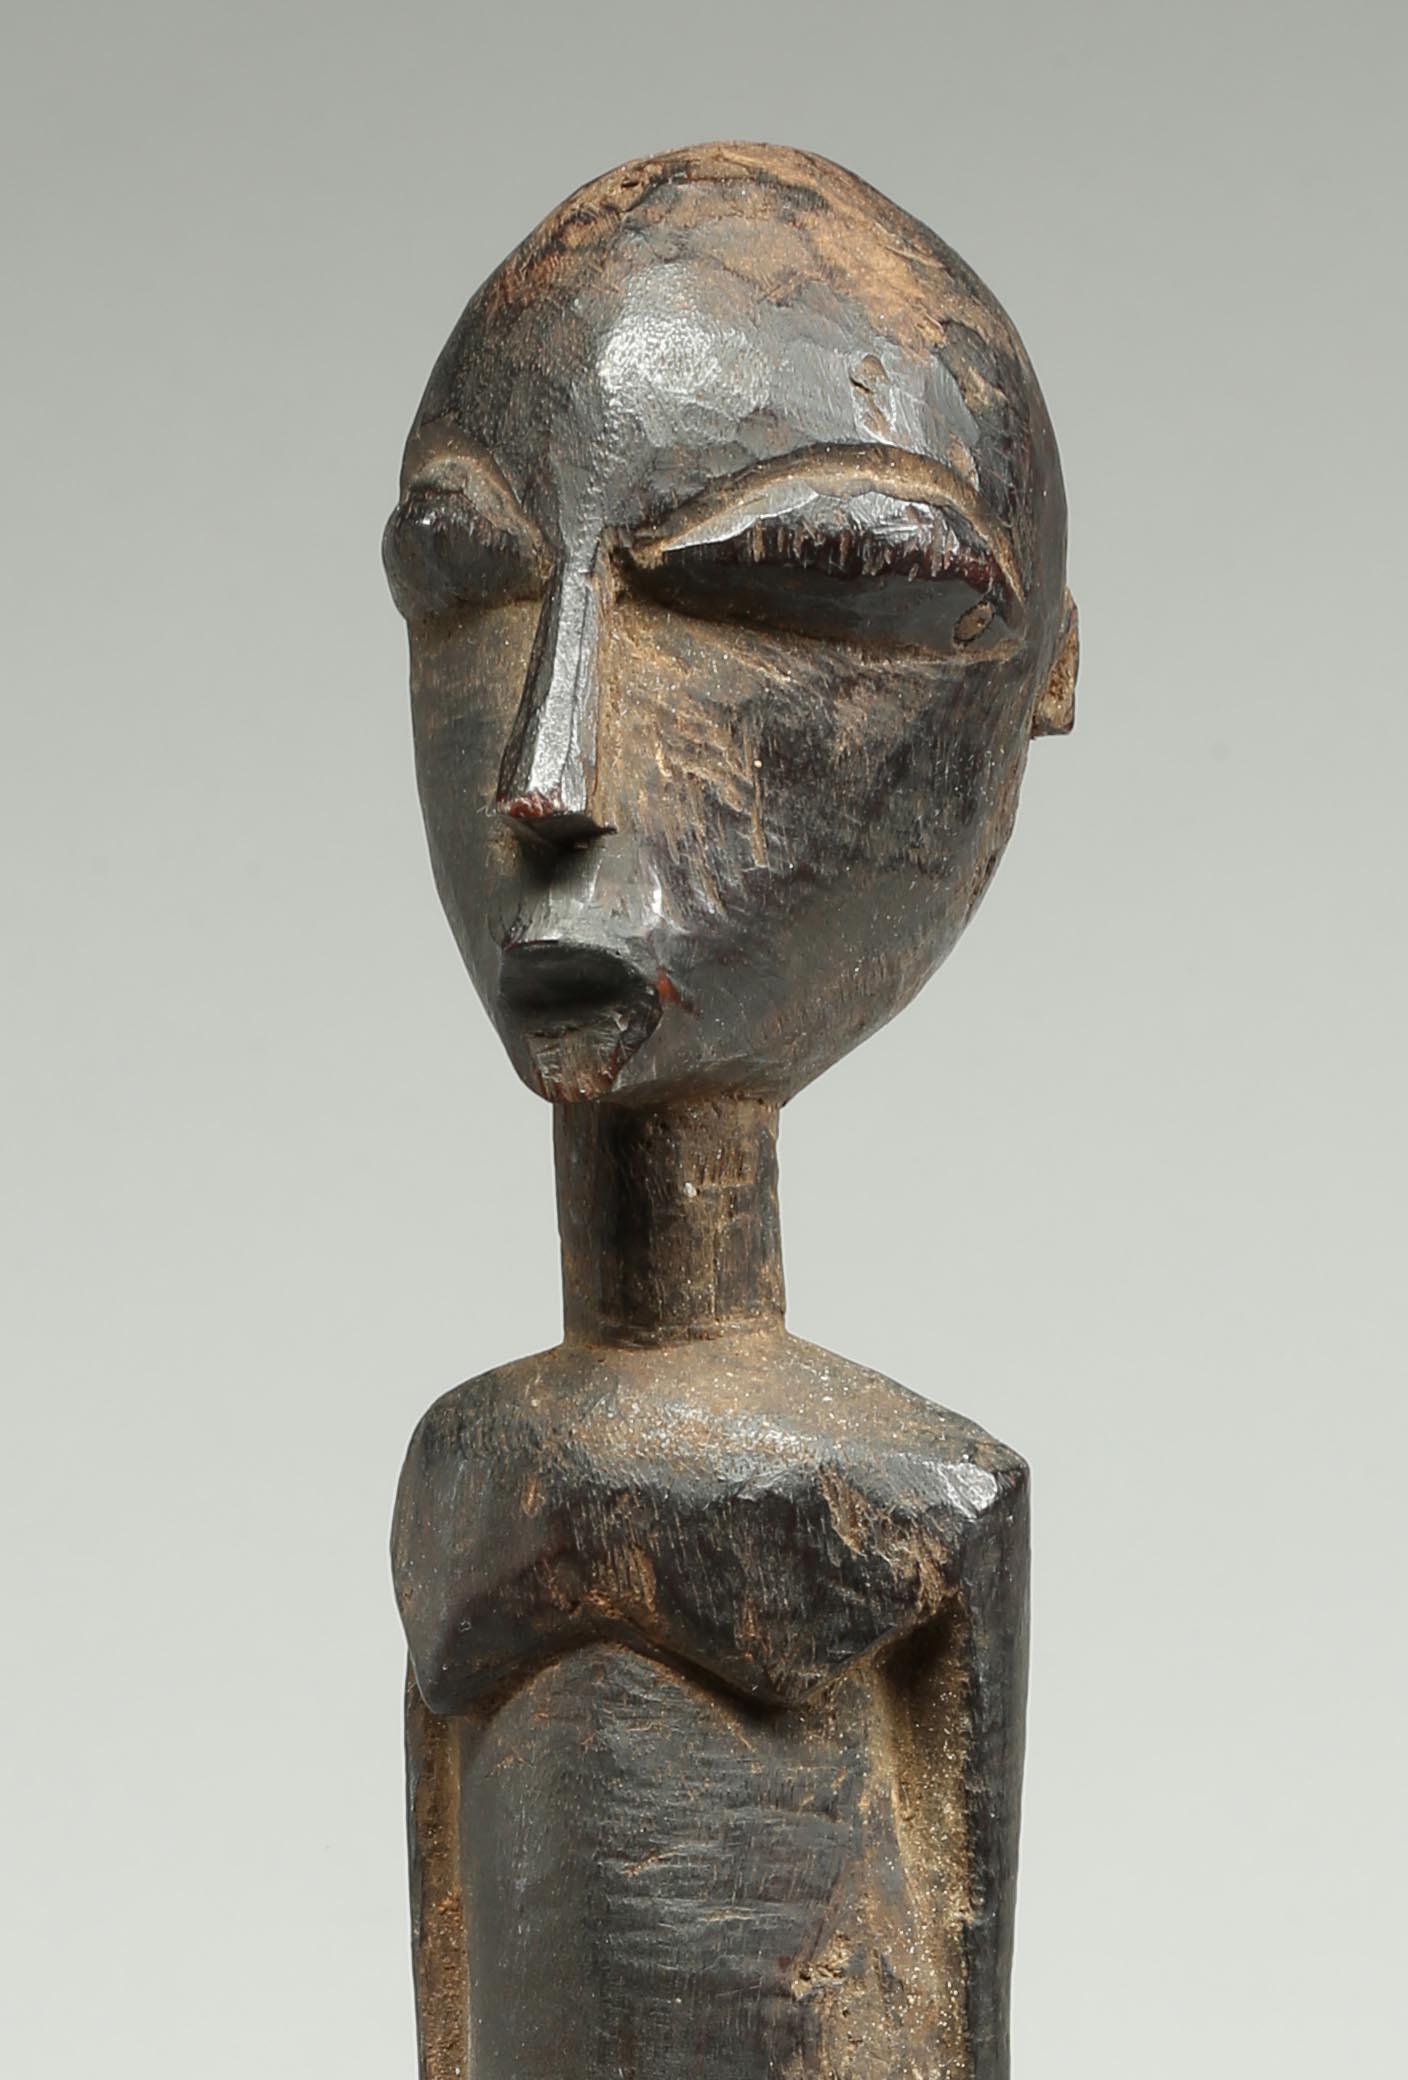 Tall Elegant Standing Lobi Figure with Expressive Face, Early 20th Century Ghana 1